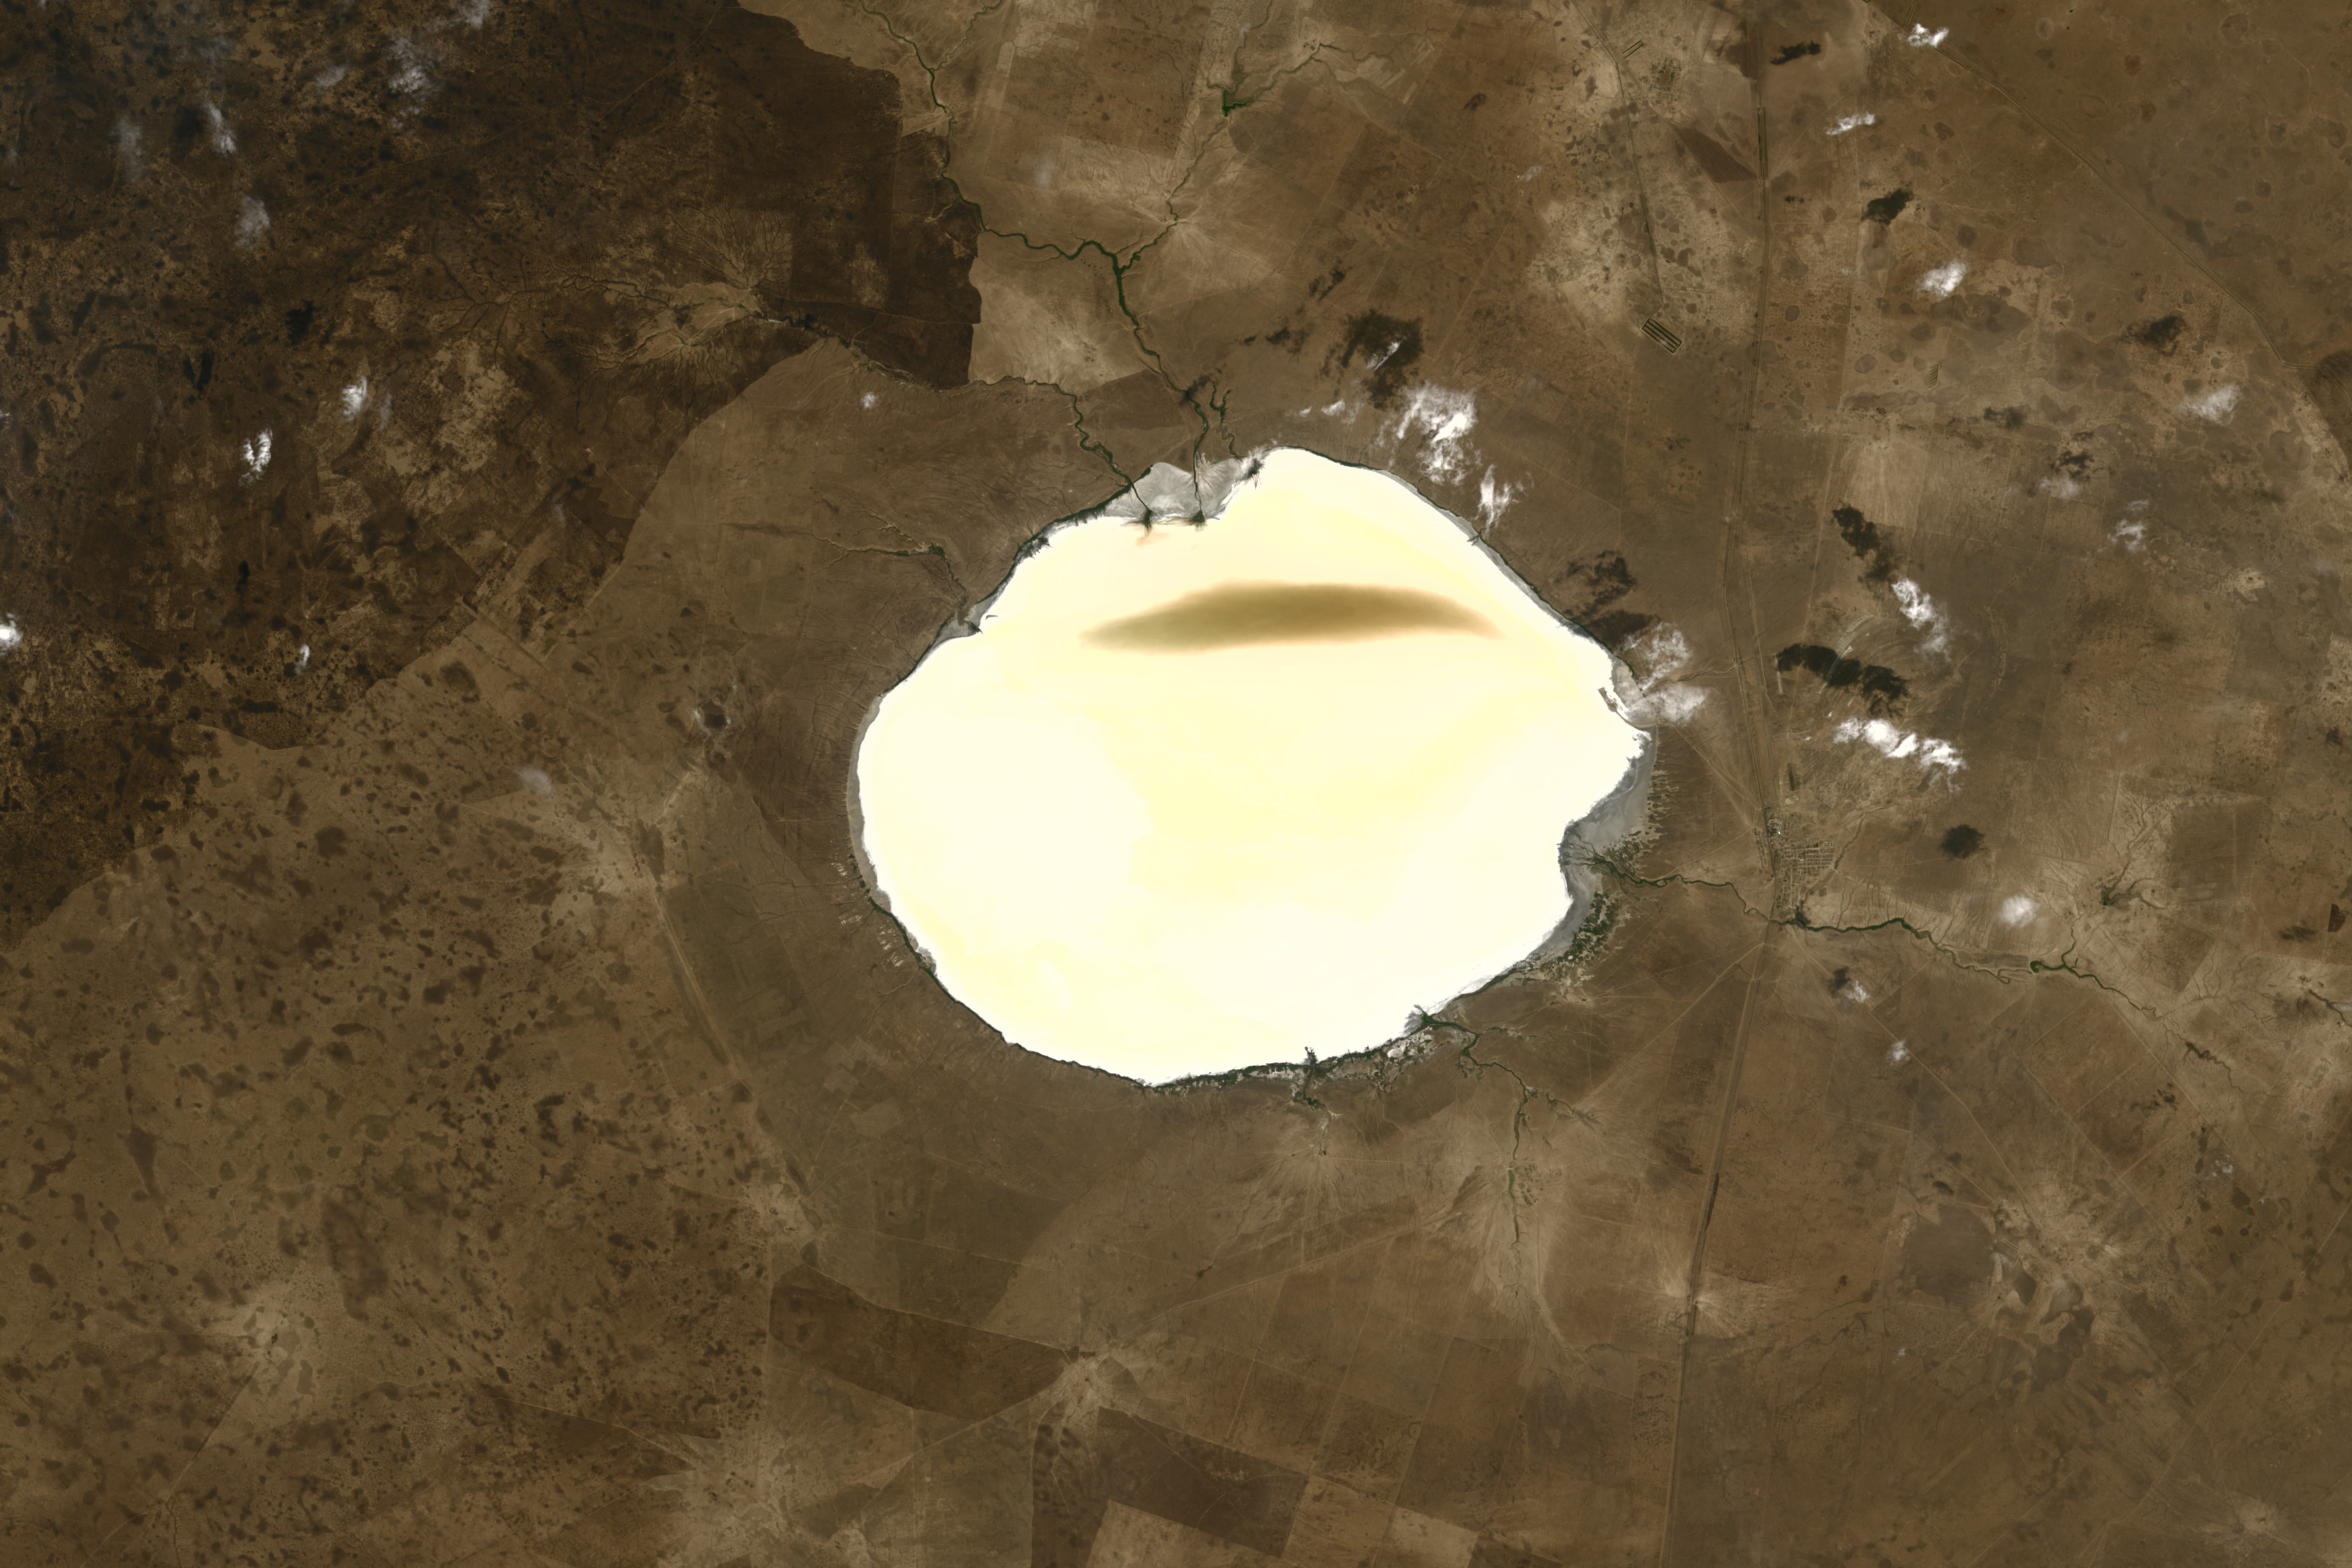 Brightening Lake Elton - related image preview